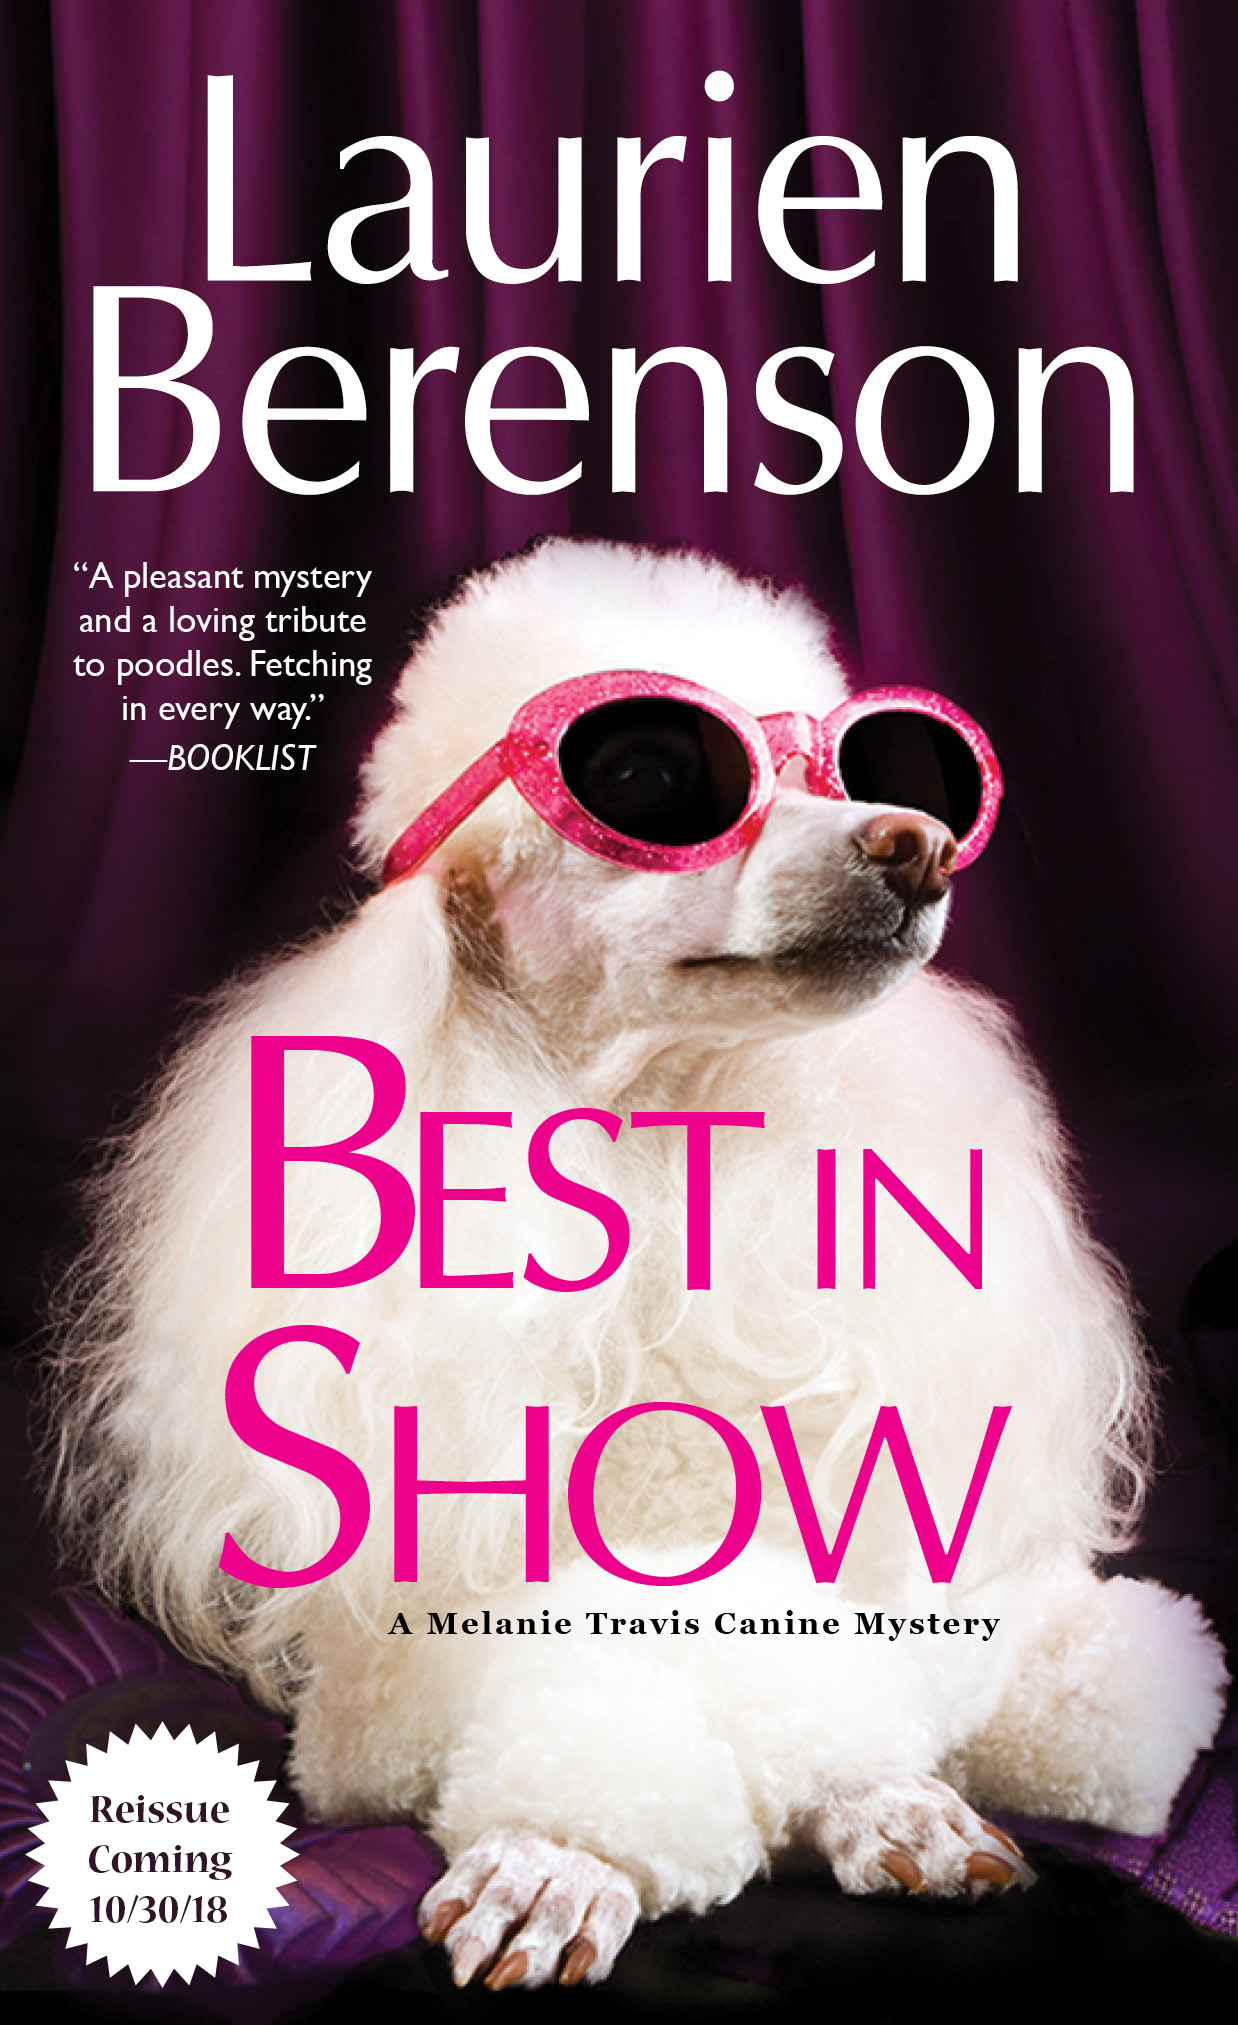 Best in Show by Laurien Berenson